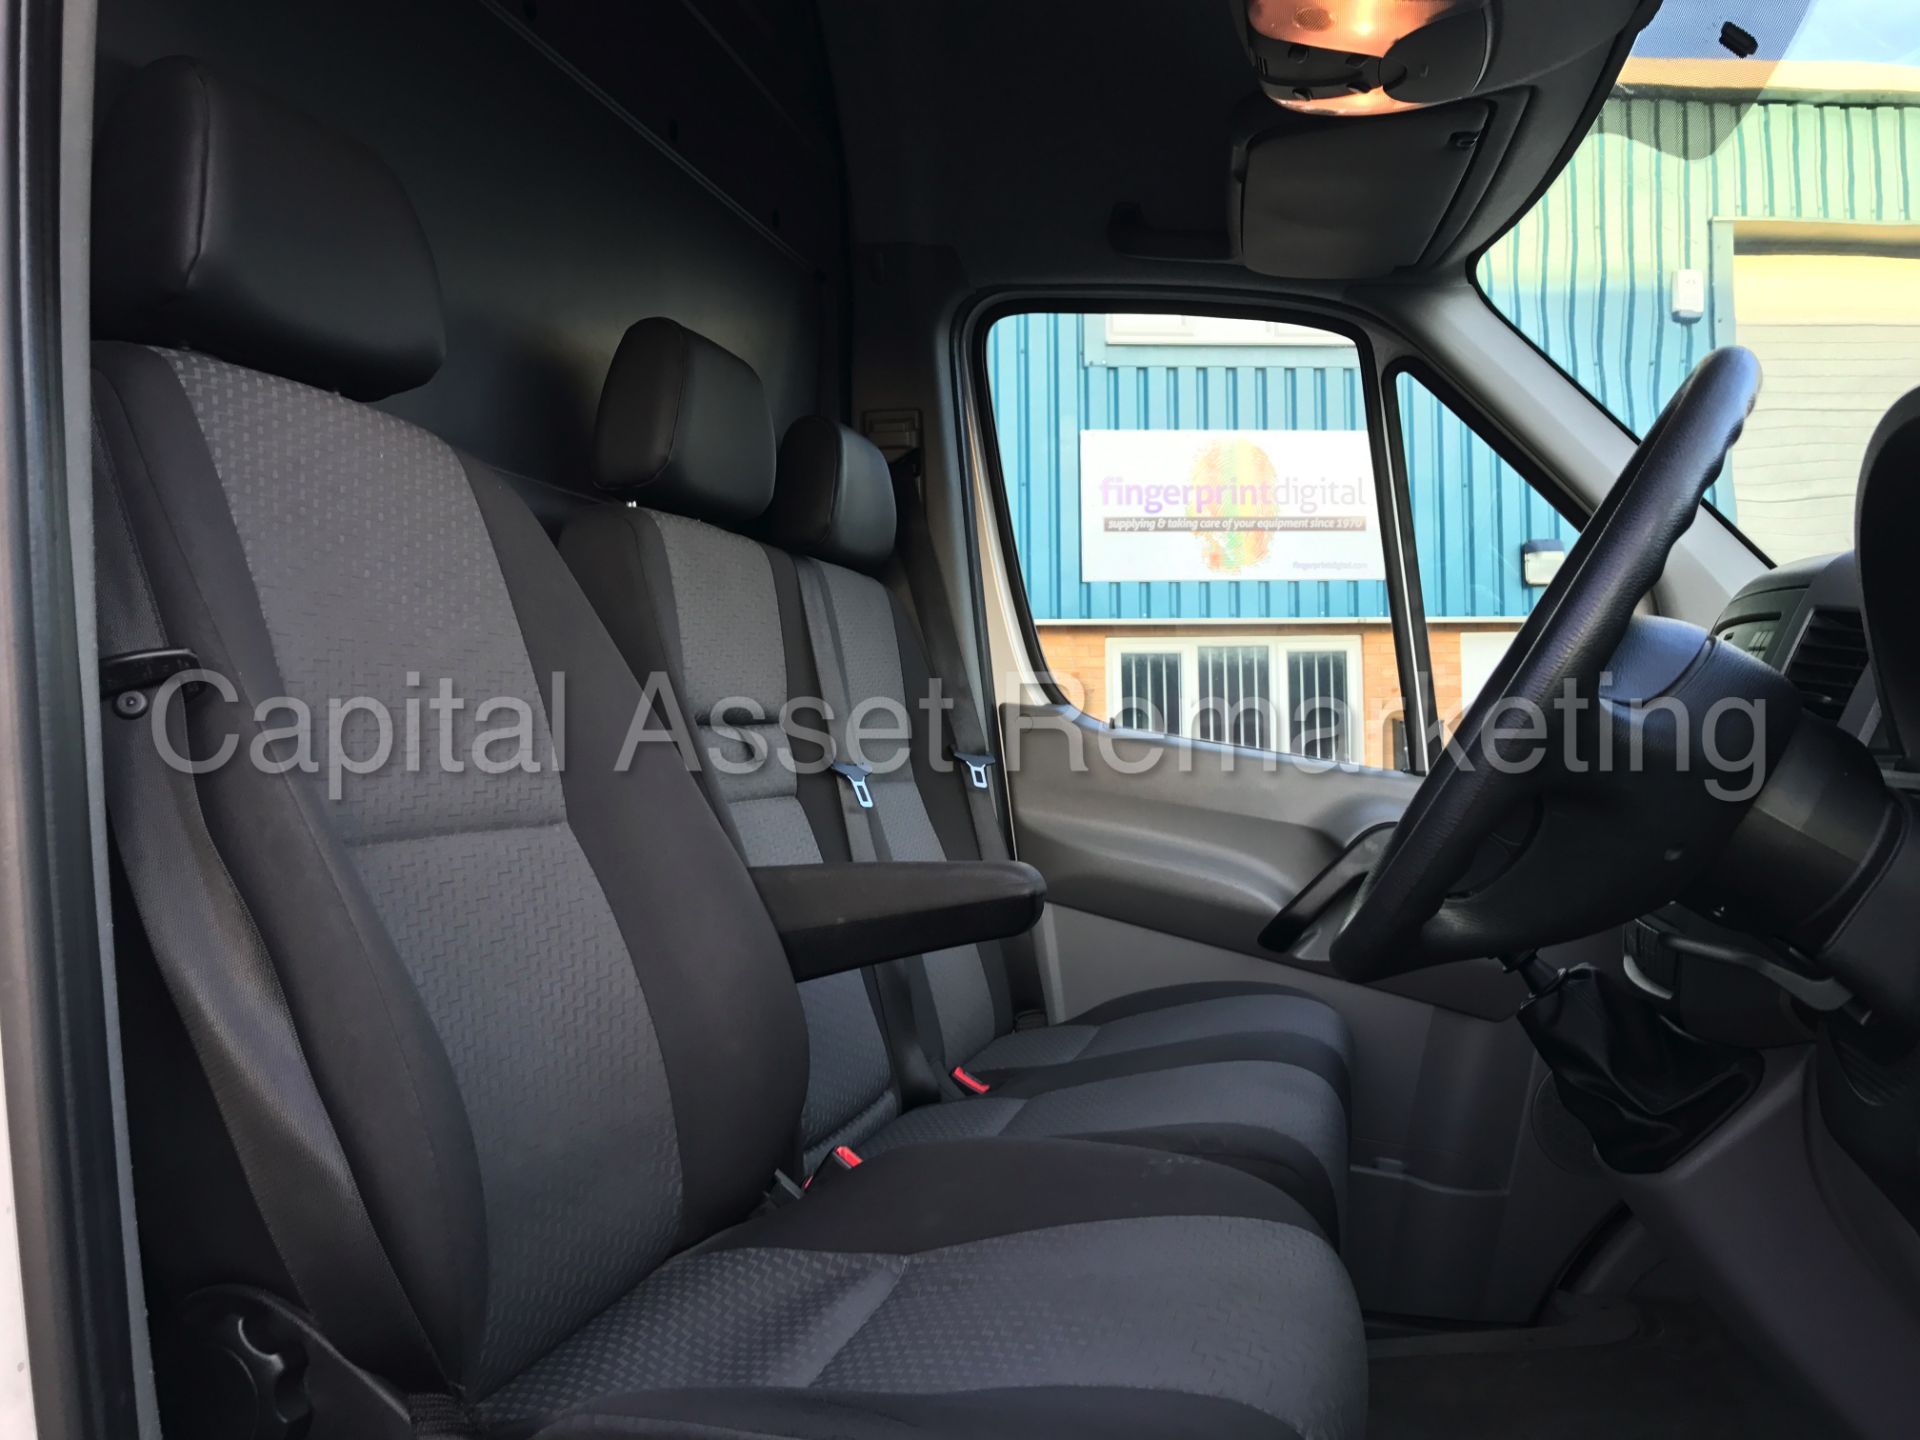 VOLKSWAGEN CRAFTER CR35 'LWB HI-ROOF' (2015 MODEL) '2.0 TDI - 163 PS - 6 SPEED' (1 COMPANY OWNER) - Image 16 of 23